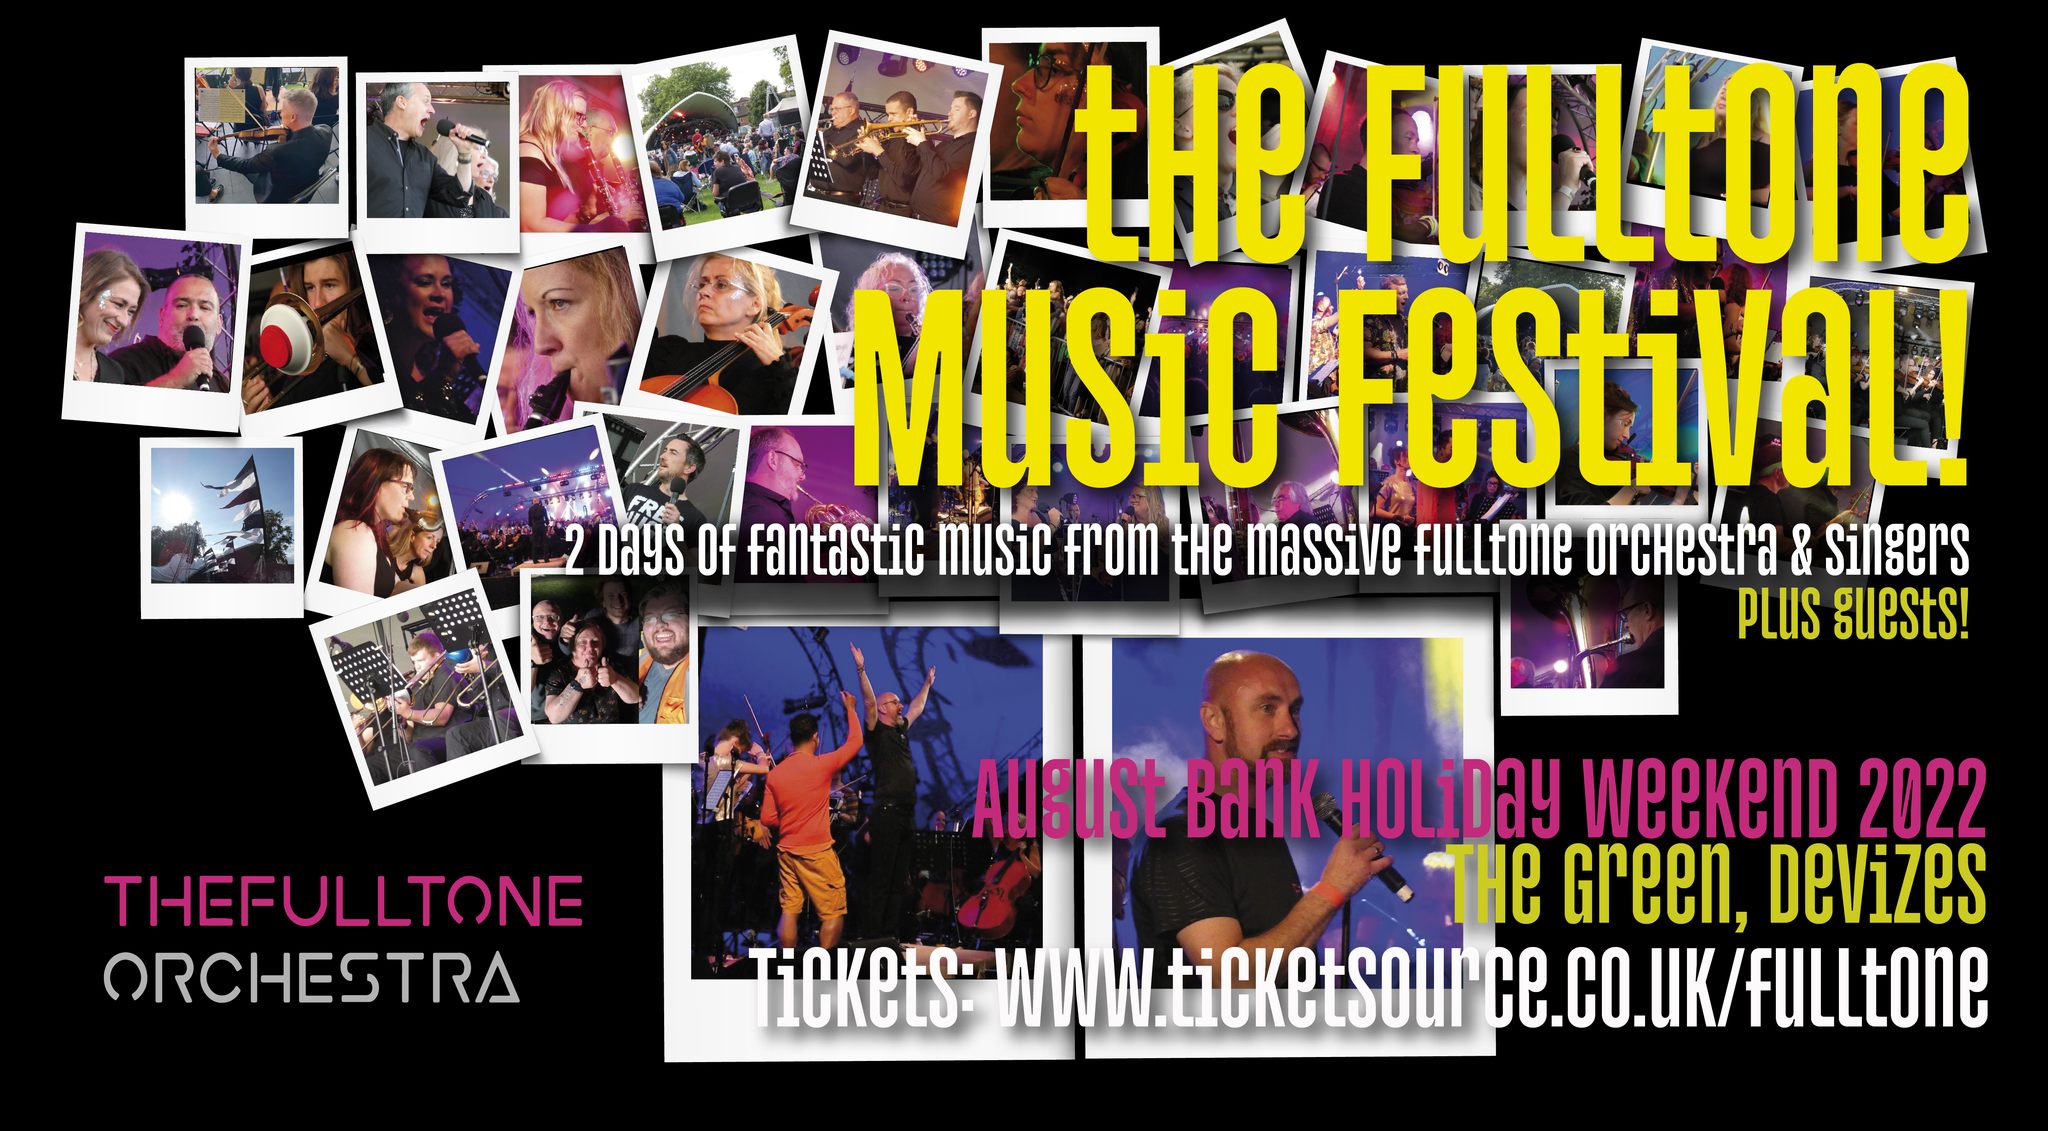 You are currently viewing Fulltone music festival 2022